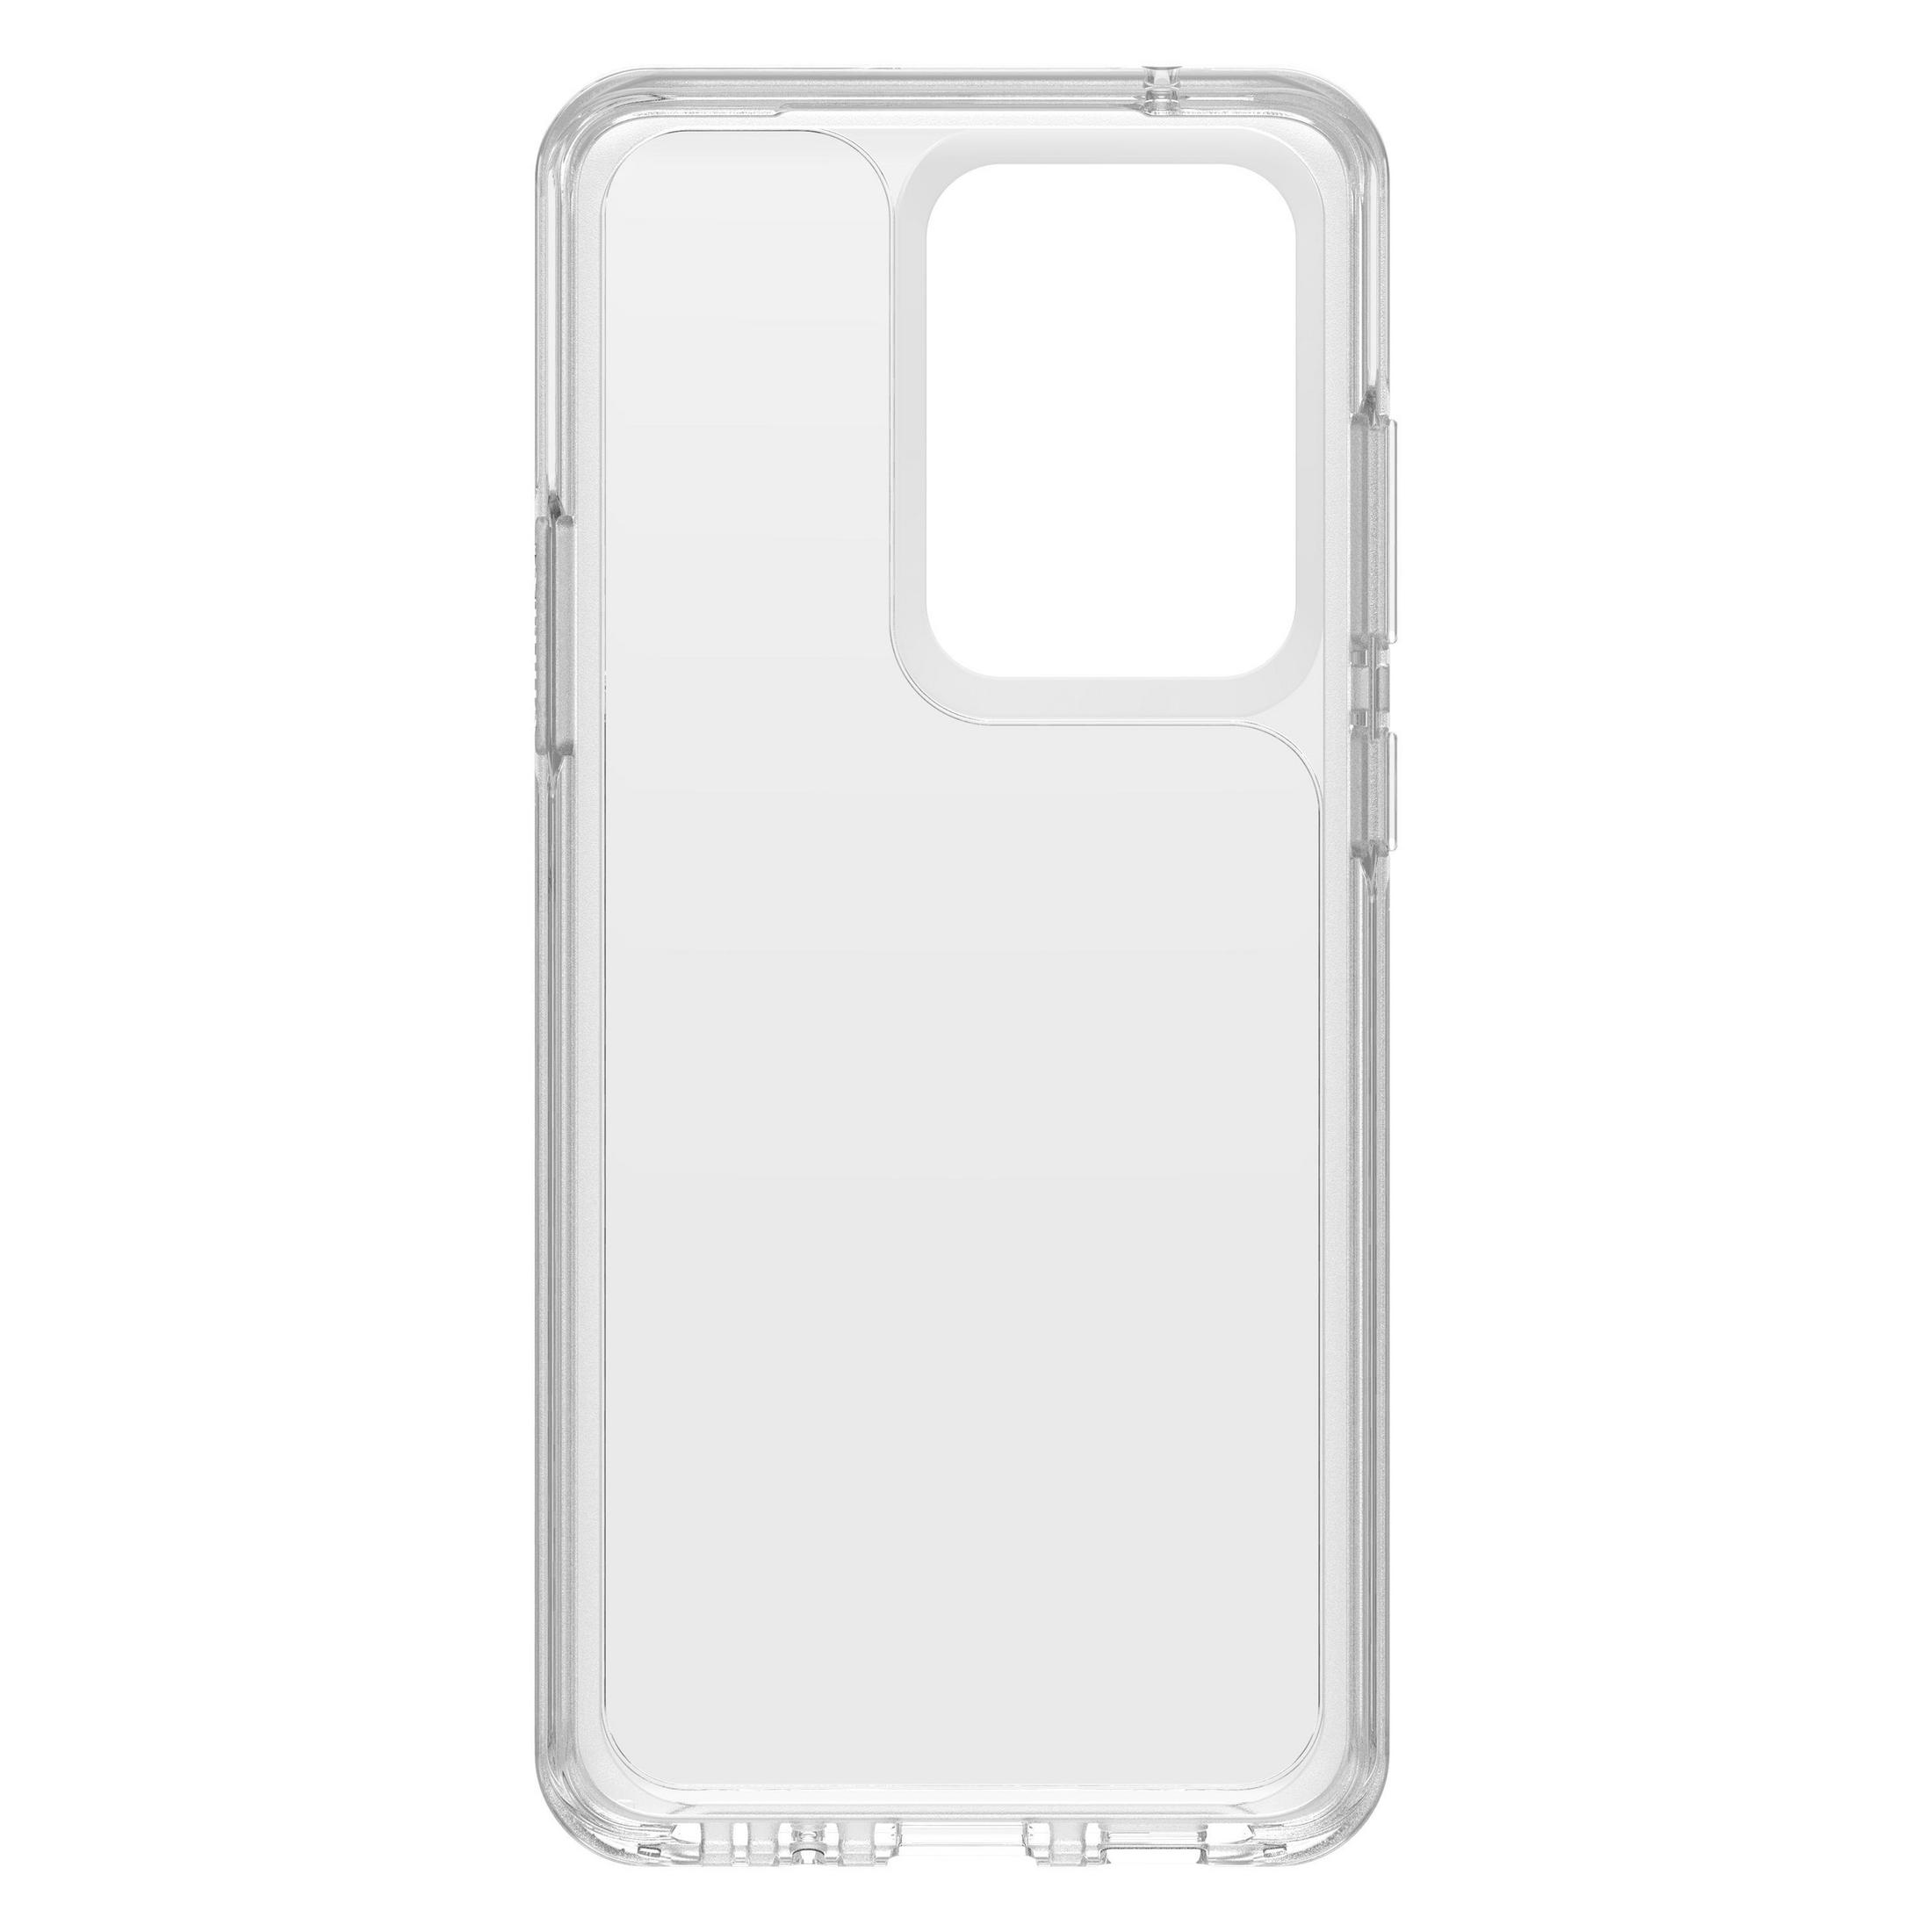 Transparent ULTRA Backcover, CLEAR, S20 77-64295 SYMMETRY Samsung, S20 Ultra, Galaxy OTTERBOX